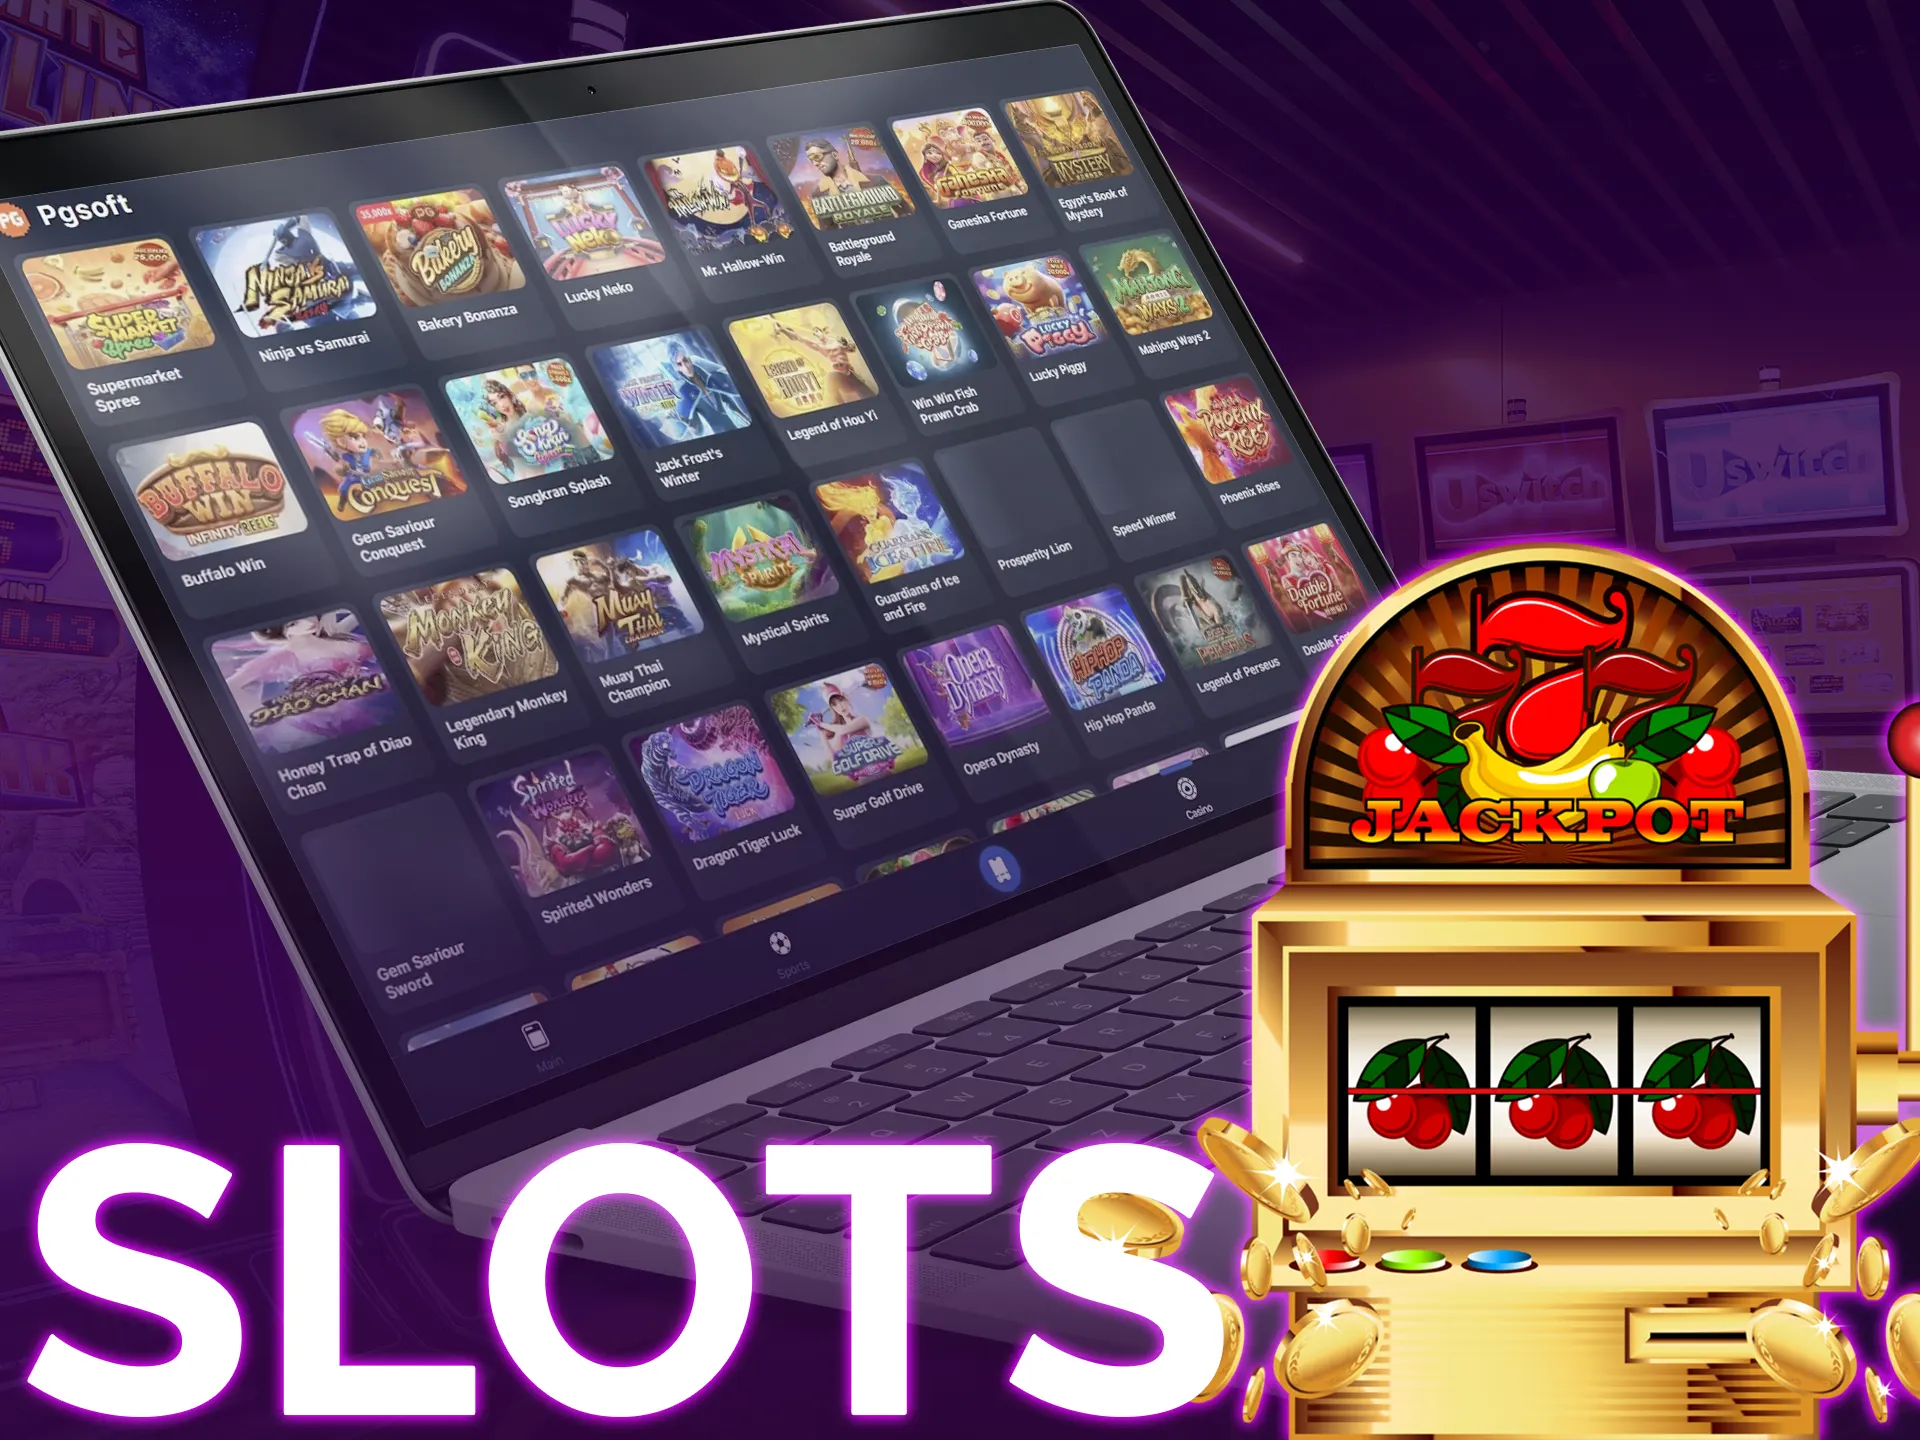 PG Soft has released over 130 slot machines, including classics and progressives.